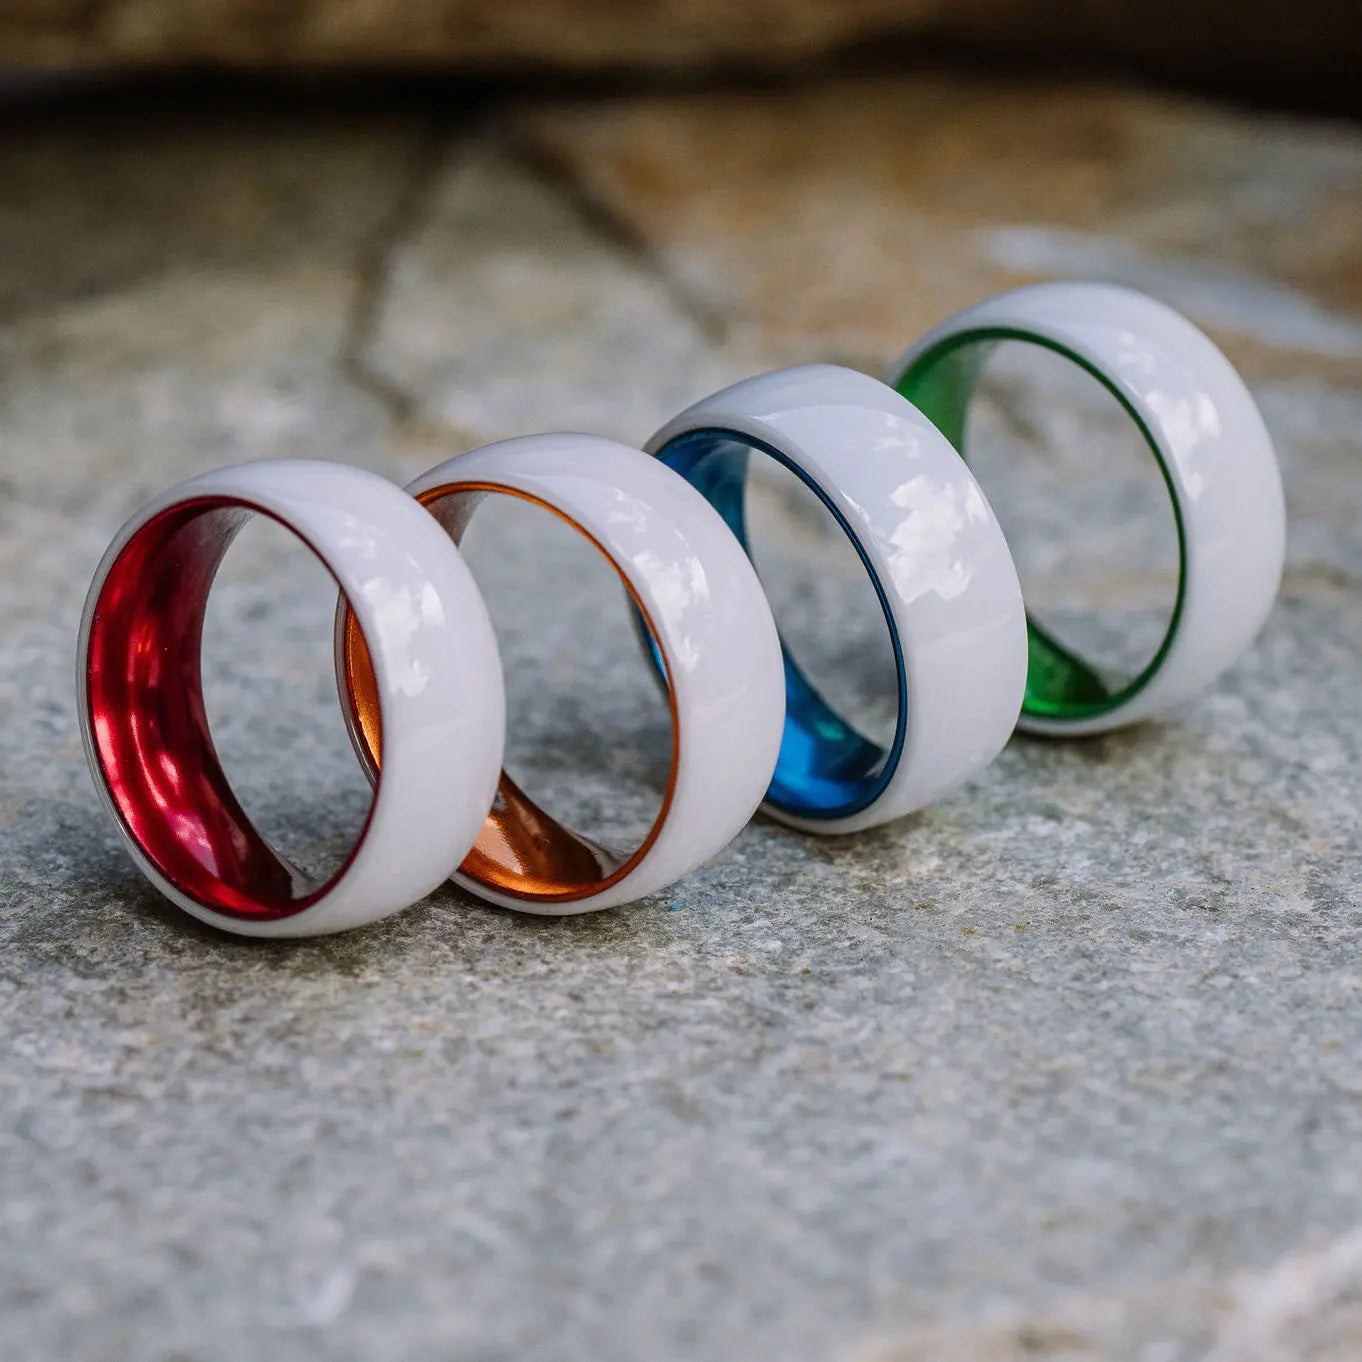 Ceramic Rings for a Stylish Look